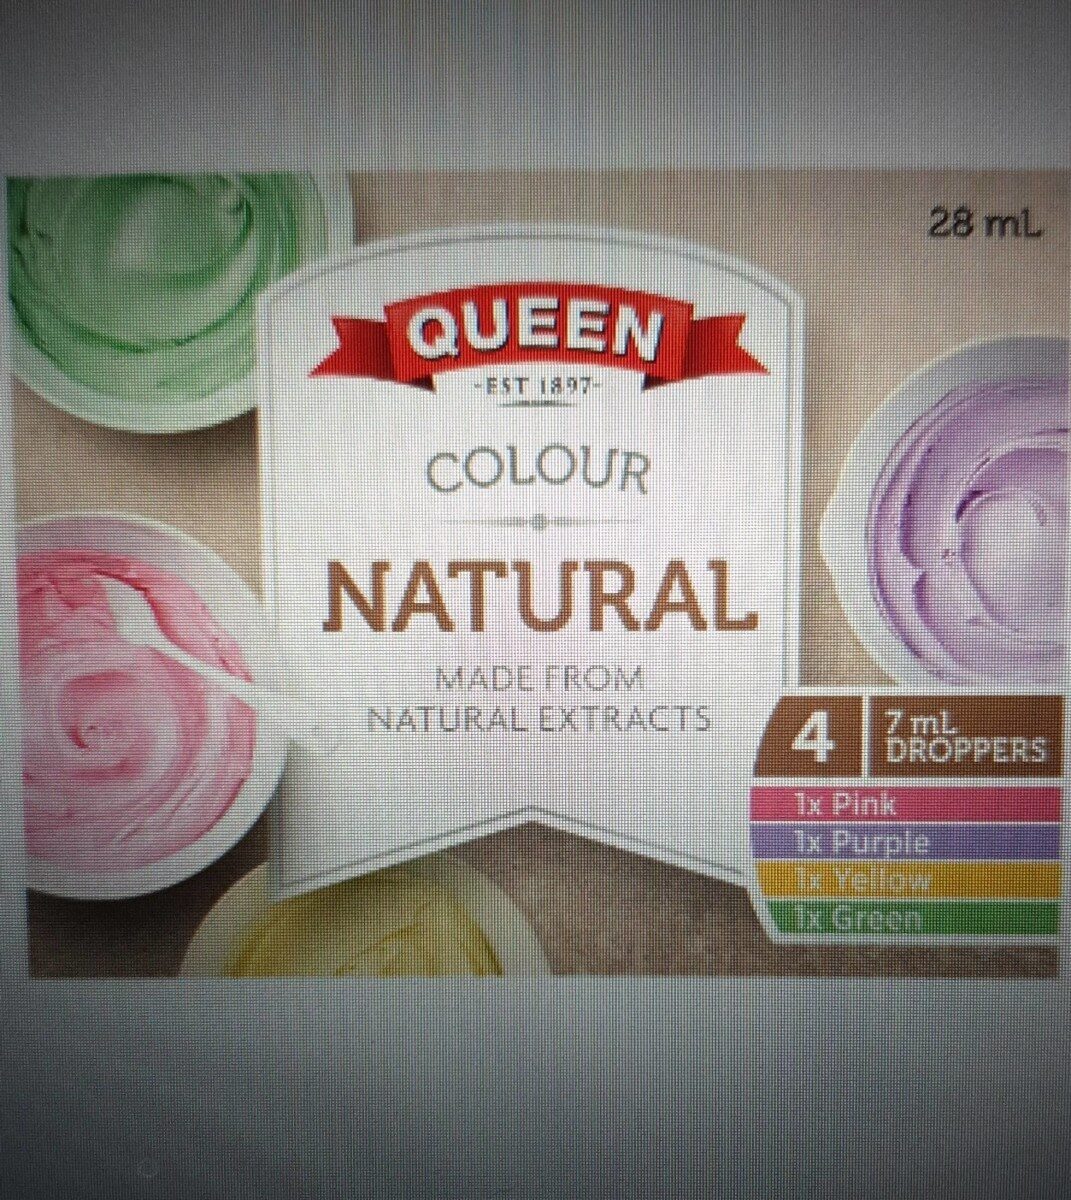 Natural food colouring - Product - en